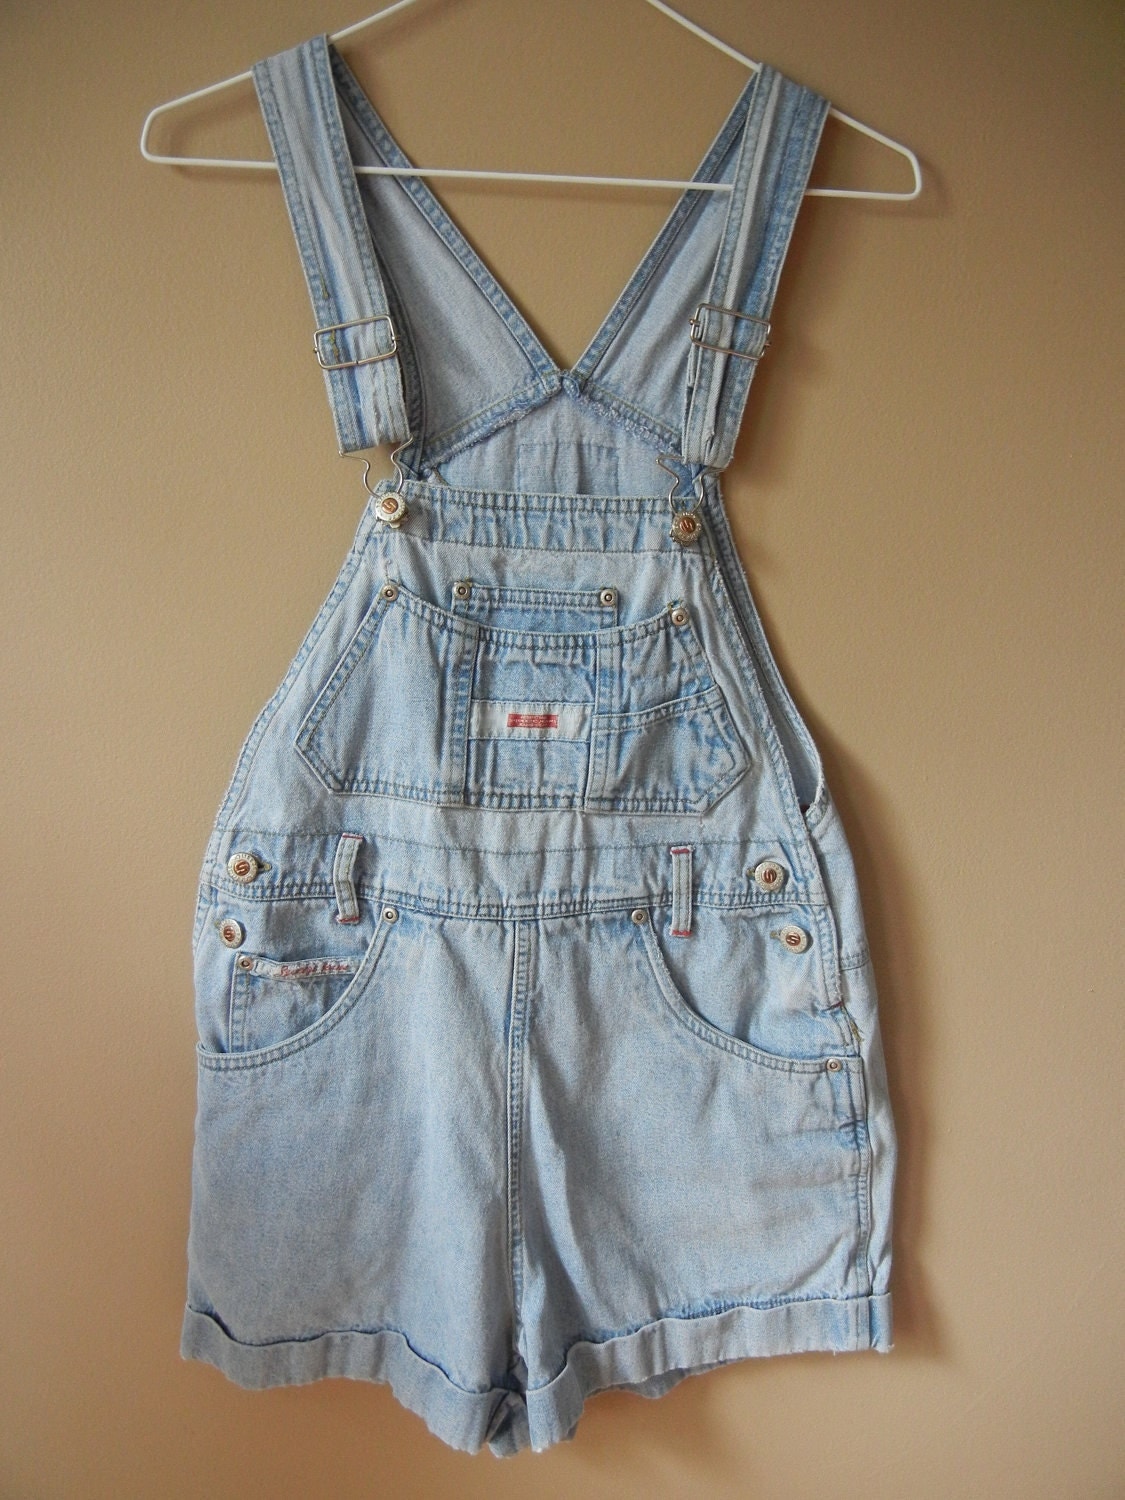 Vintage 90's Denim Overall Shorts Size XS-Small Squeeze